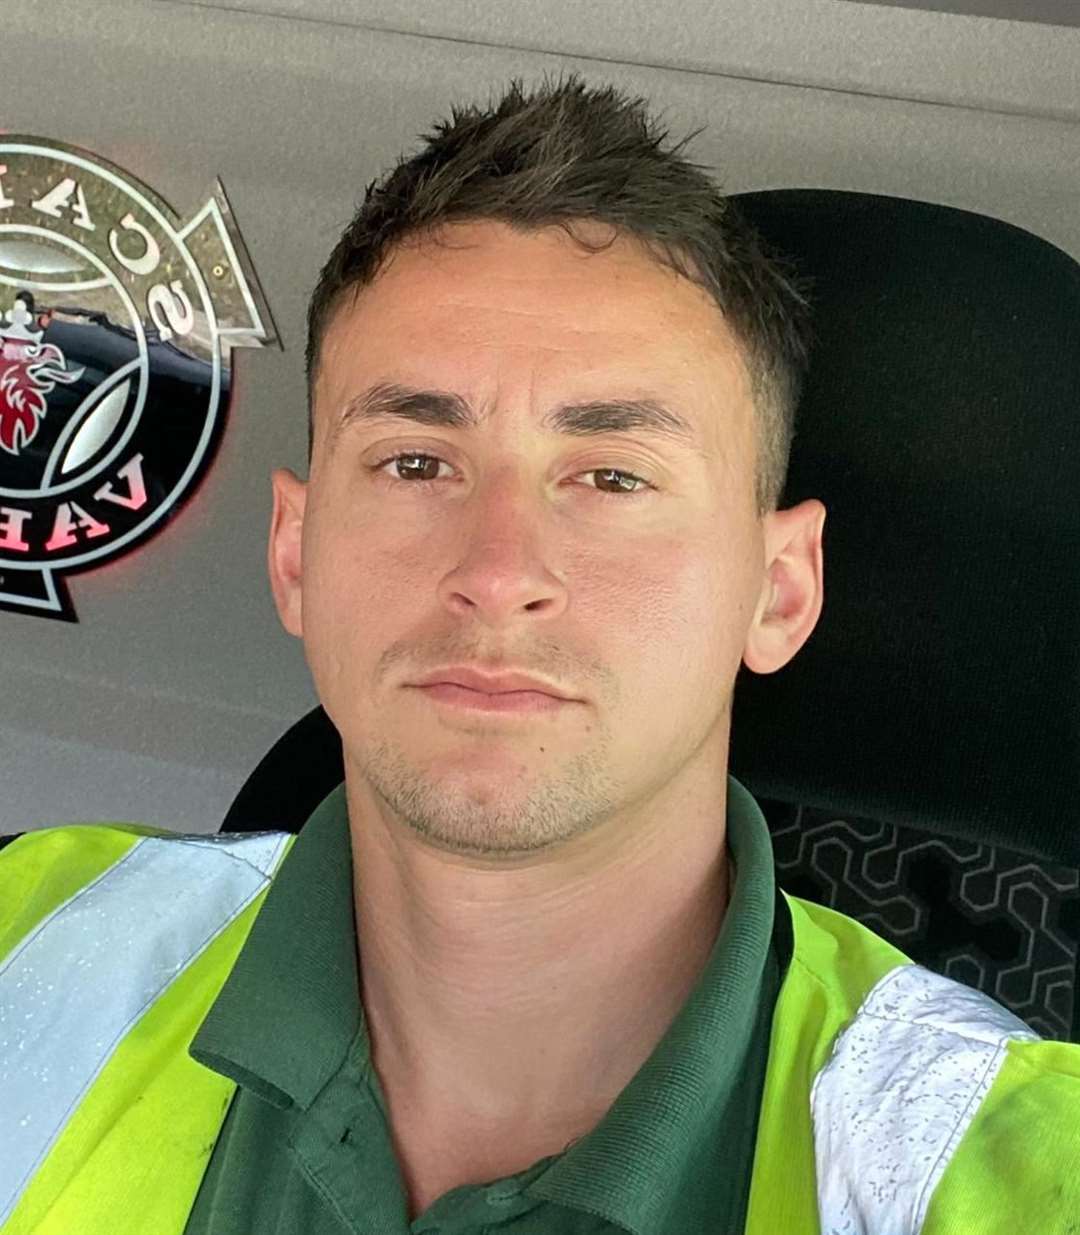 Lorry driver Ben Evans praised the response of people at the scene of a crash on the A267 who he says worked "tirelessly" to save lives until an ambulance arrived.